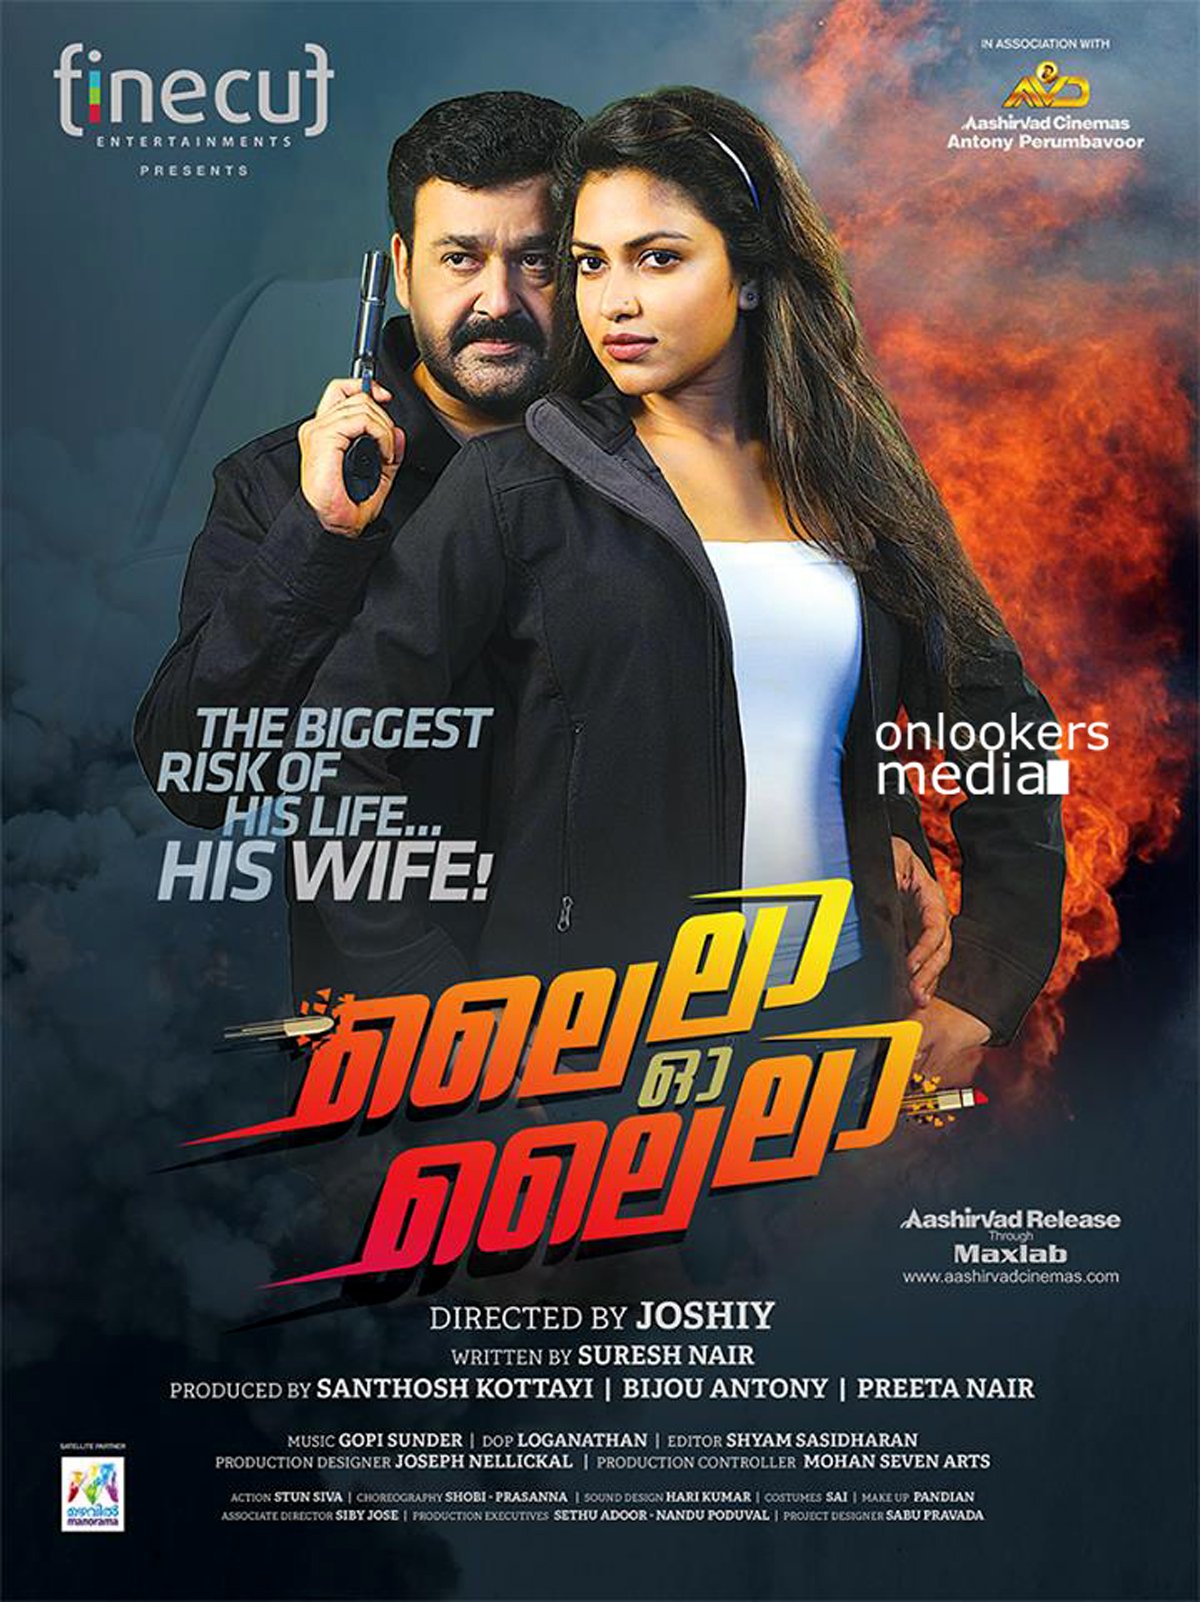 Malayalam poster of the movie Lailaa O Lailaa